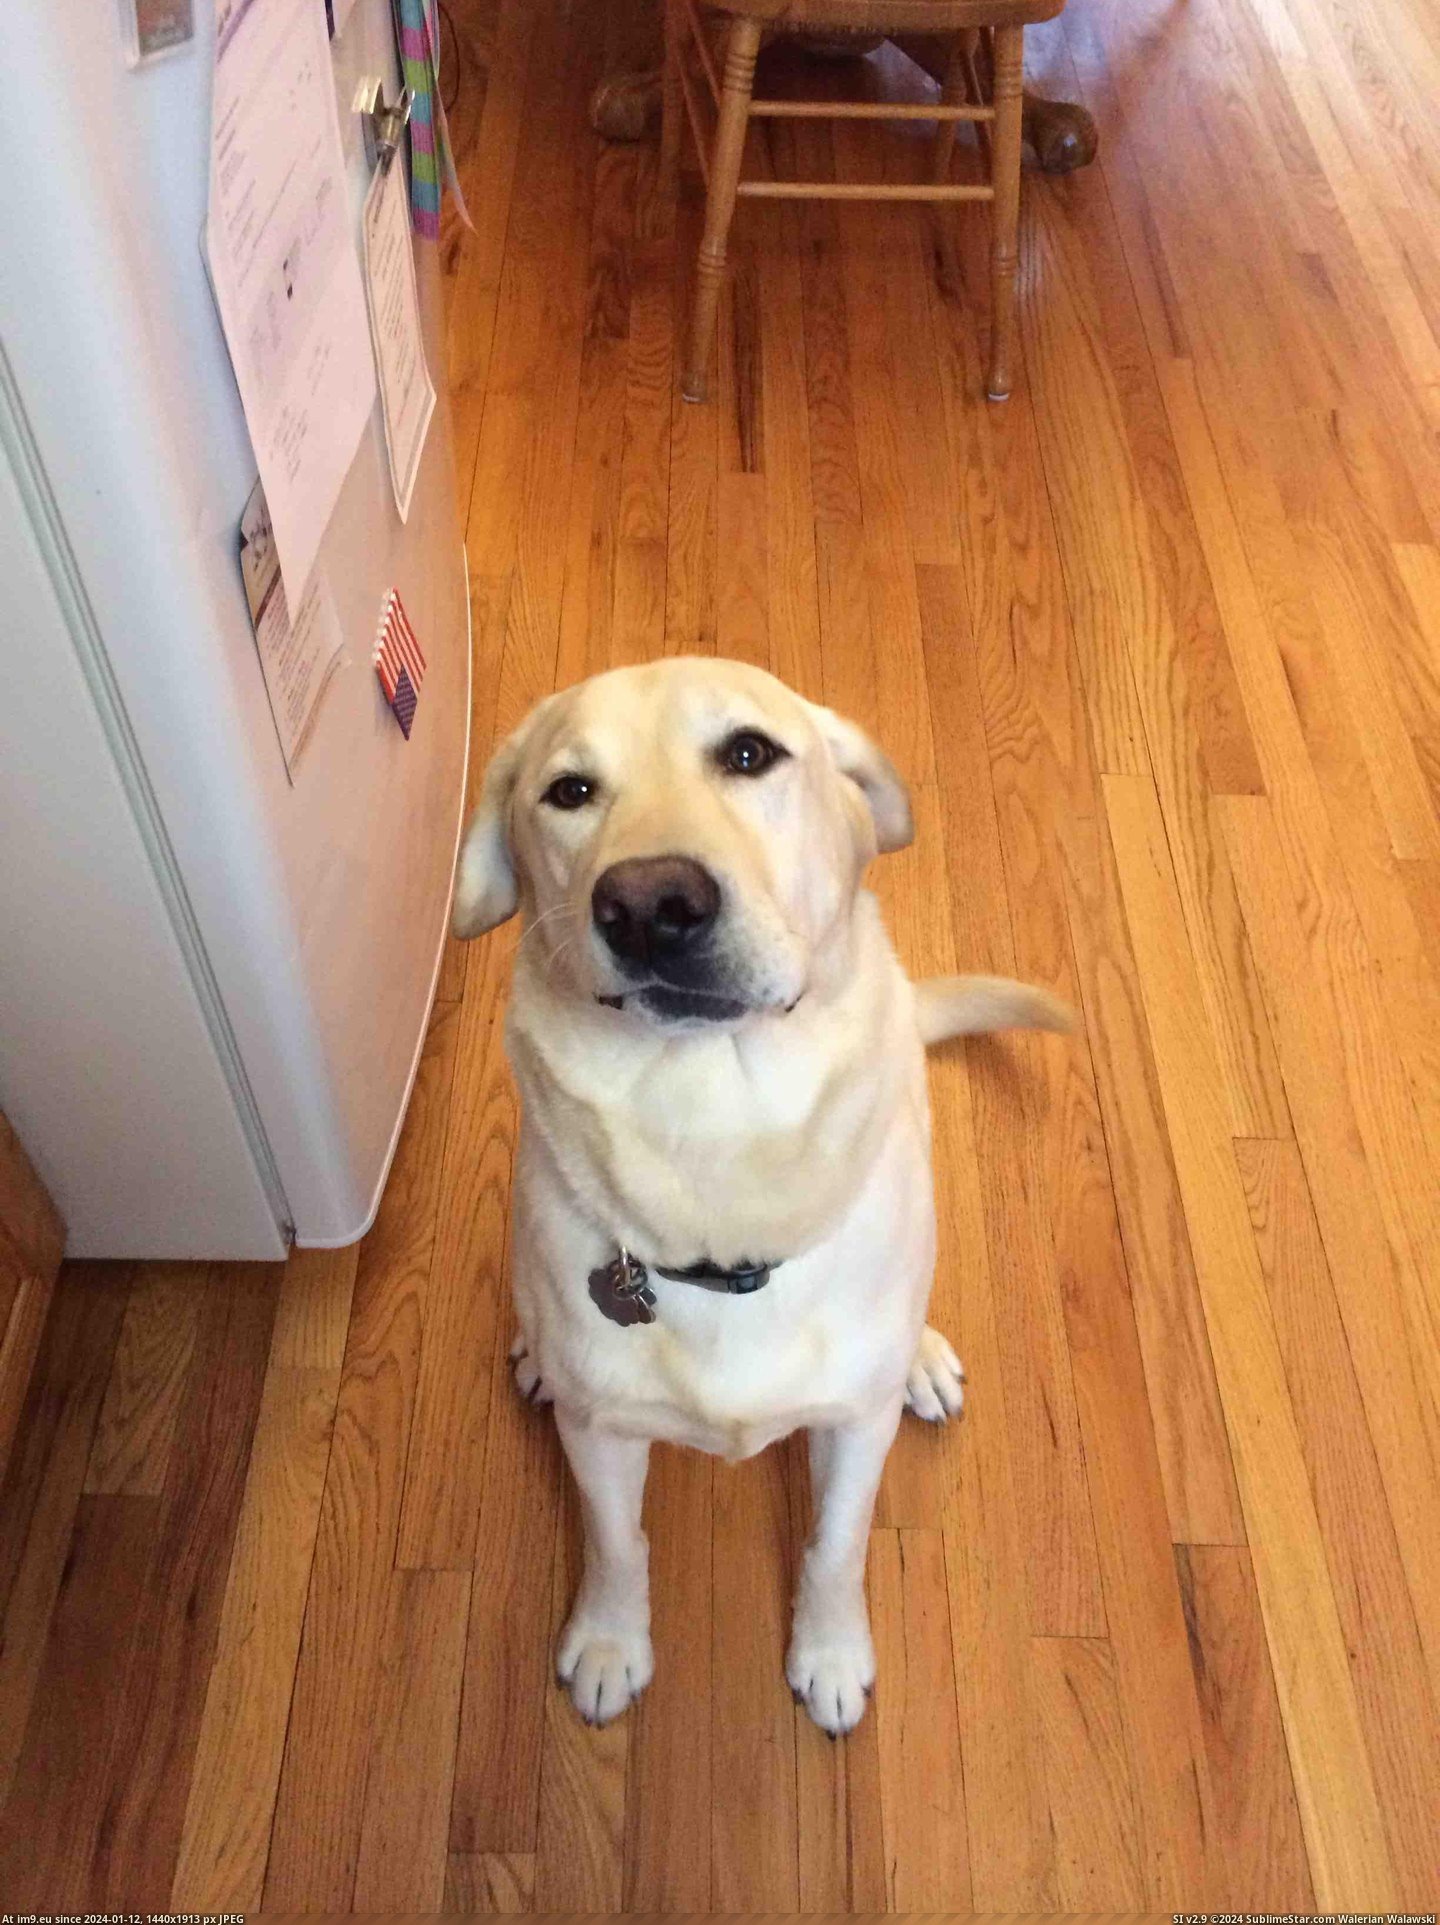 #Was #Face #Blue #Lab #Crooked #Feeling #Born #Yellow [Aww] My yellow lab was born with a crooked face. Seeing it when I'm feeling blue makes my days 100x better Pic. (Obraz z album My r/AWW favs))